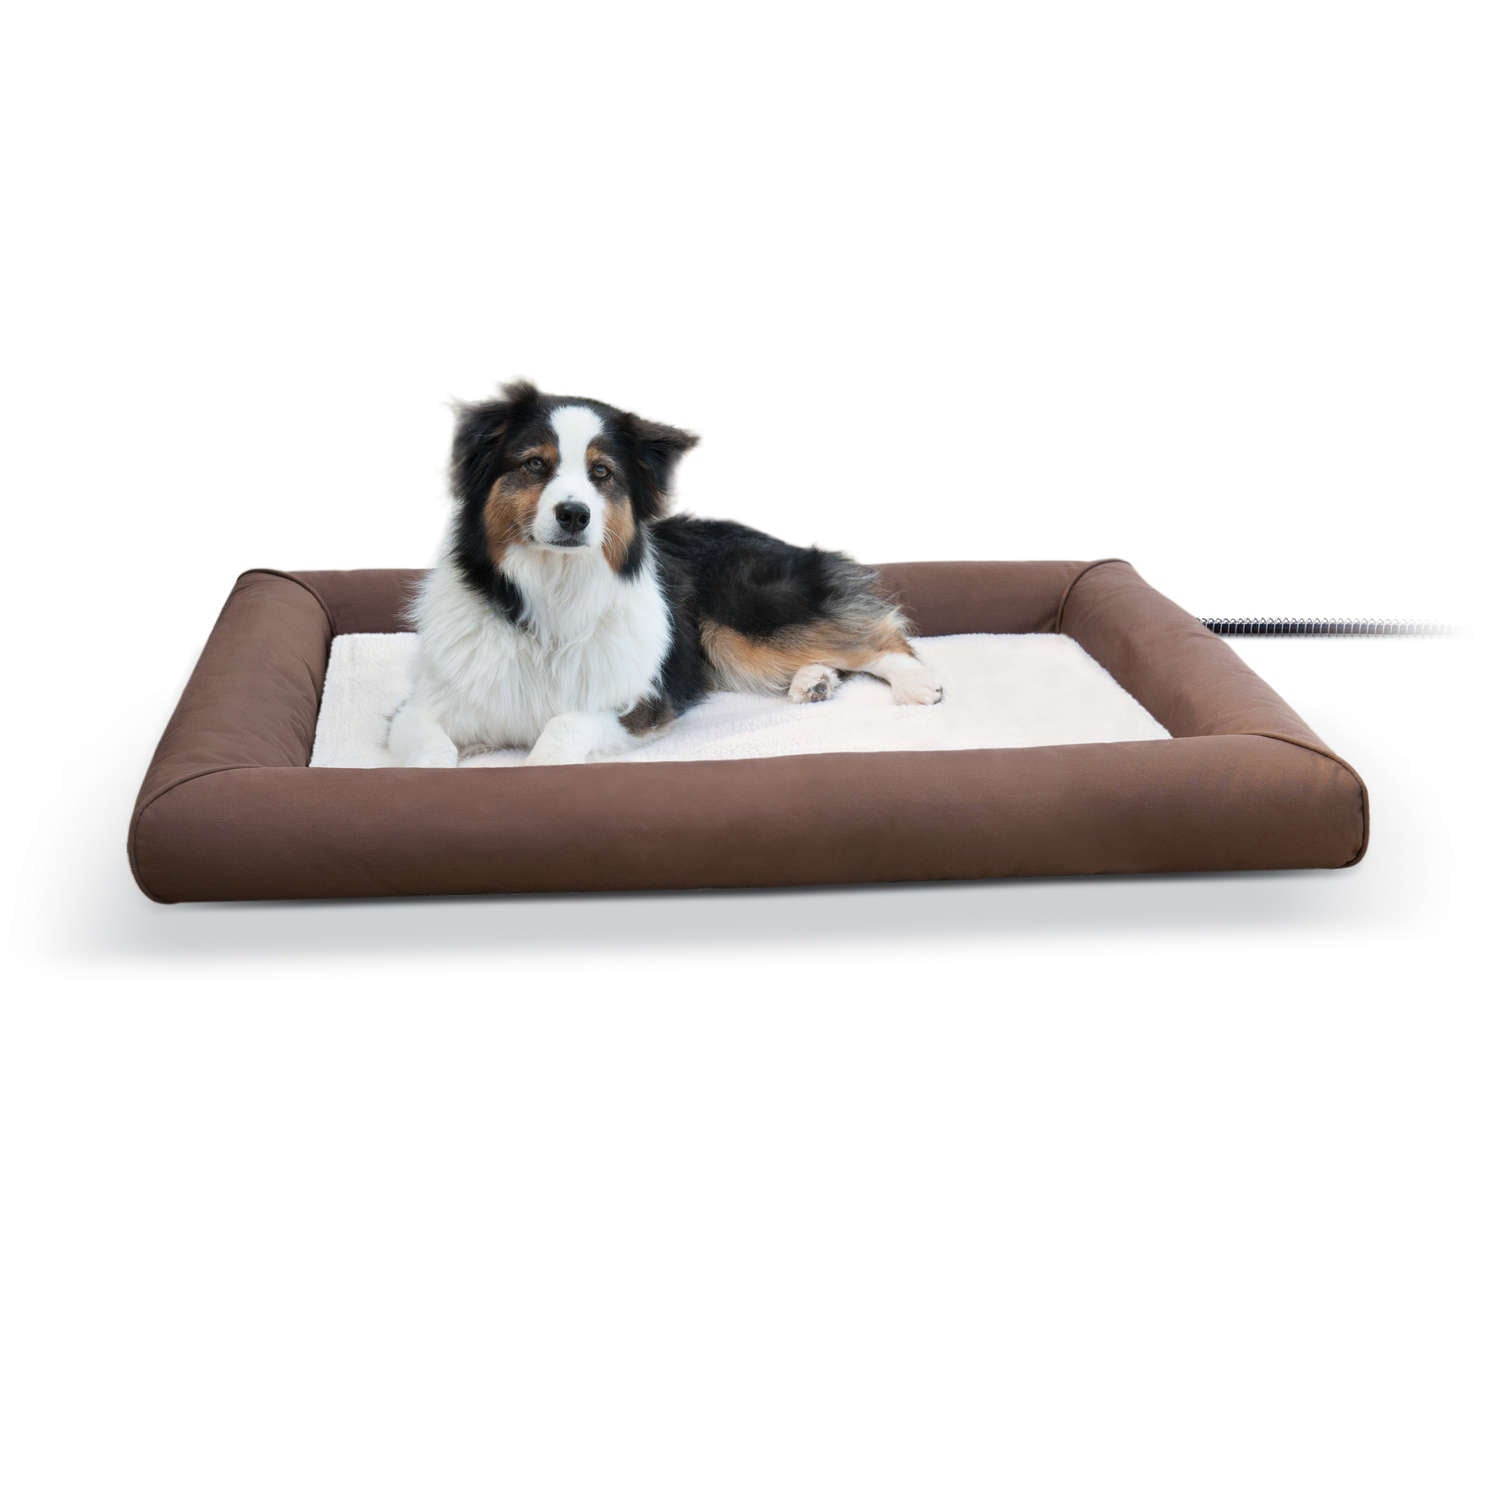 K&h Pet Products Kh1099 Deluxe Lectro-soft Outdoor Heated Pet Bed